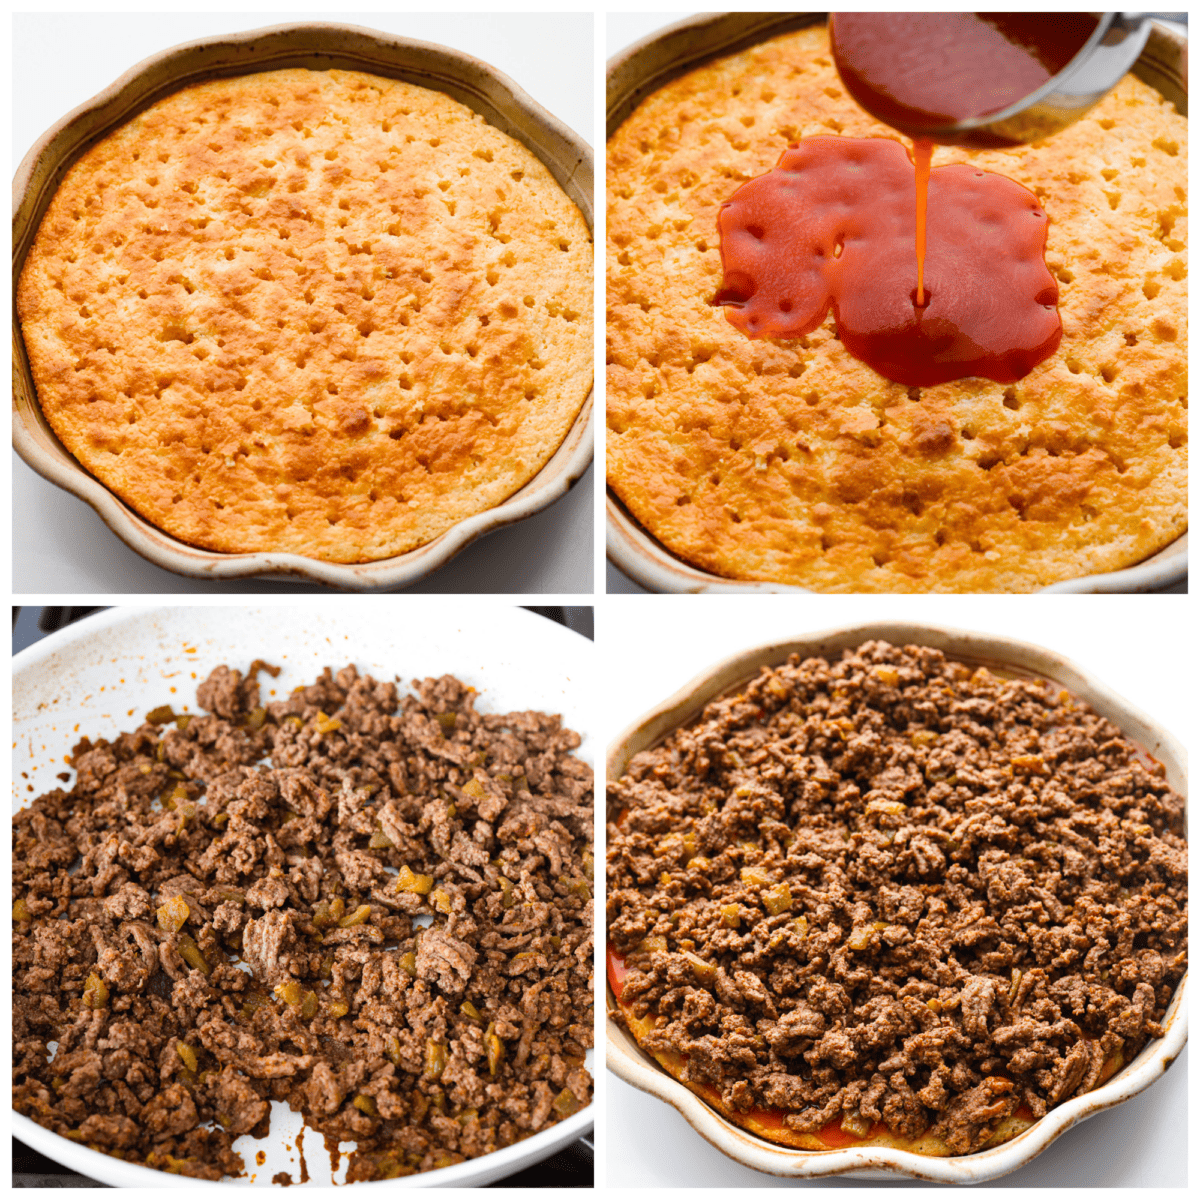 4 pictures showing how to make the pie, step by step. Adding on the sauce, cooking the meat and combining them together. 